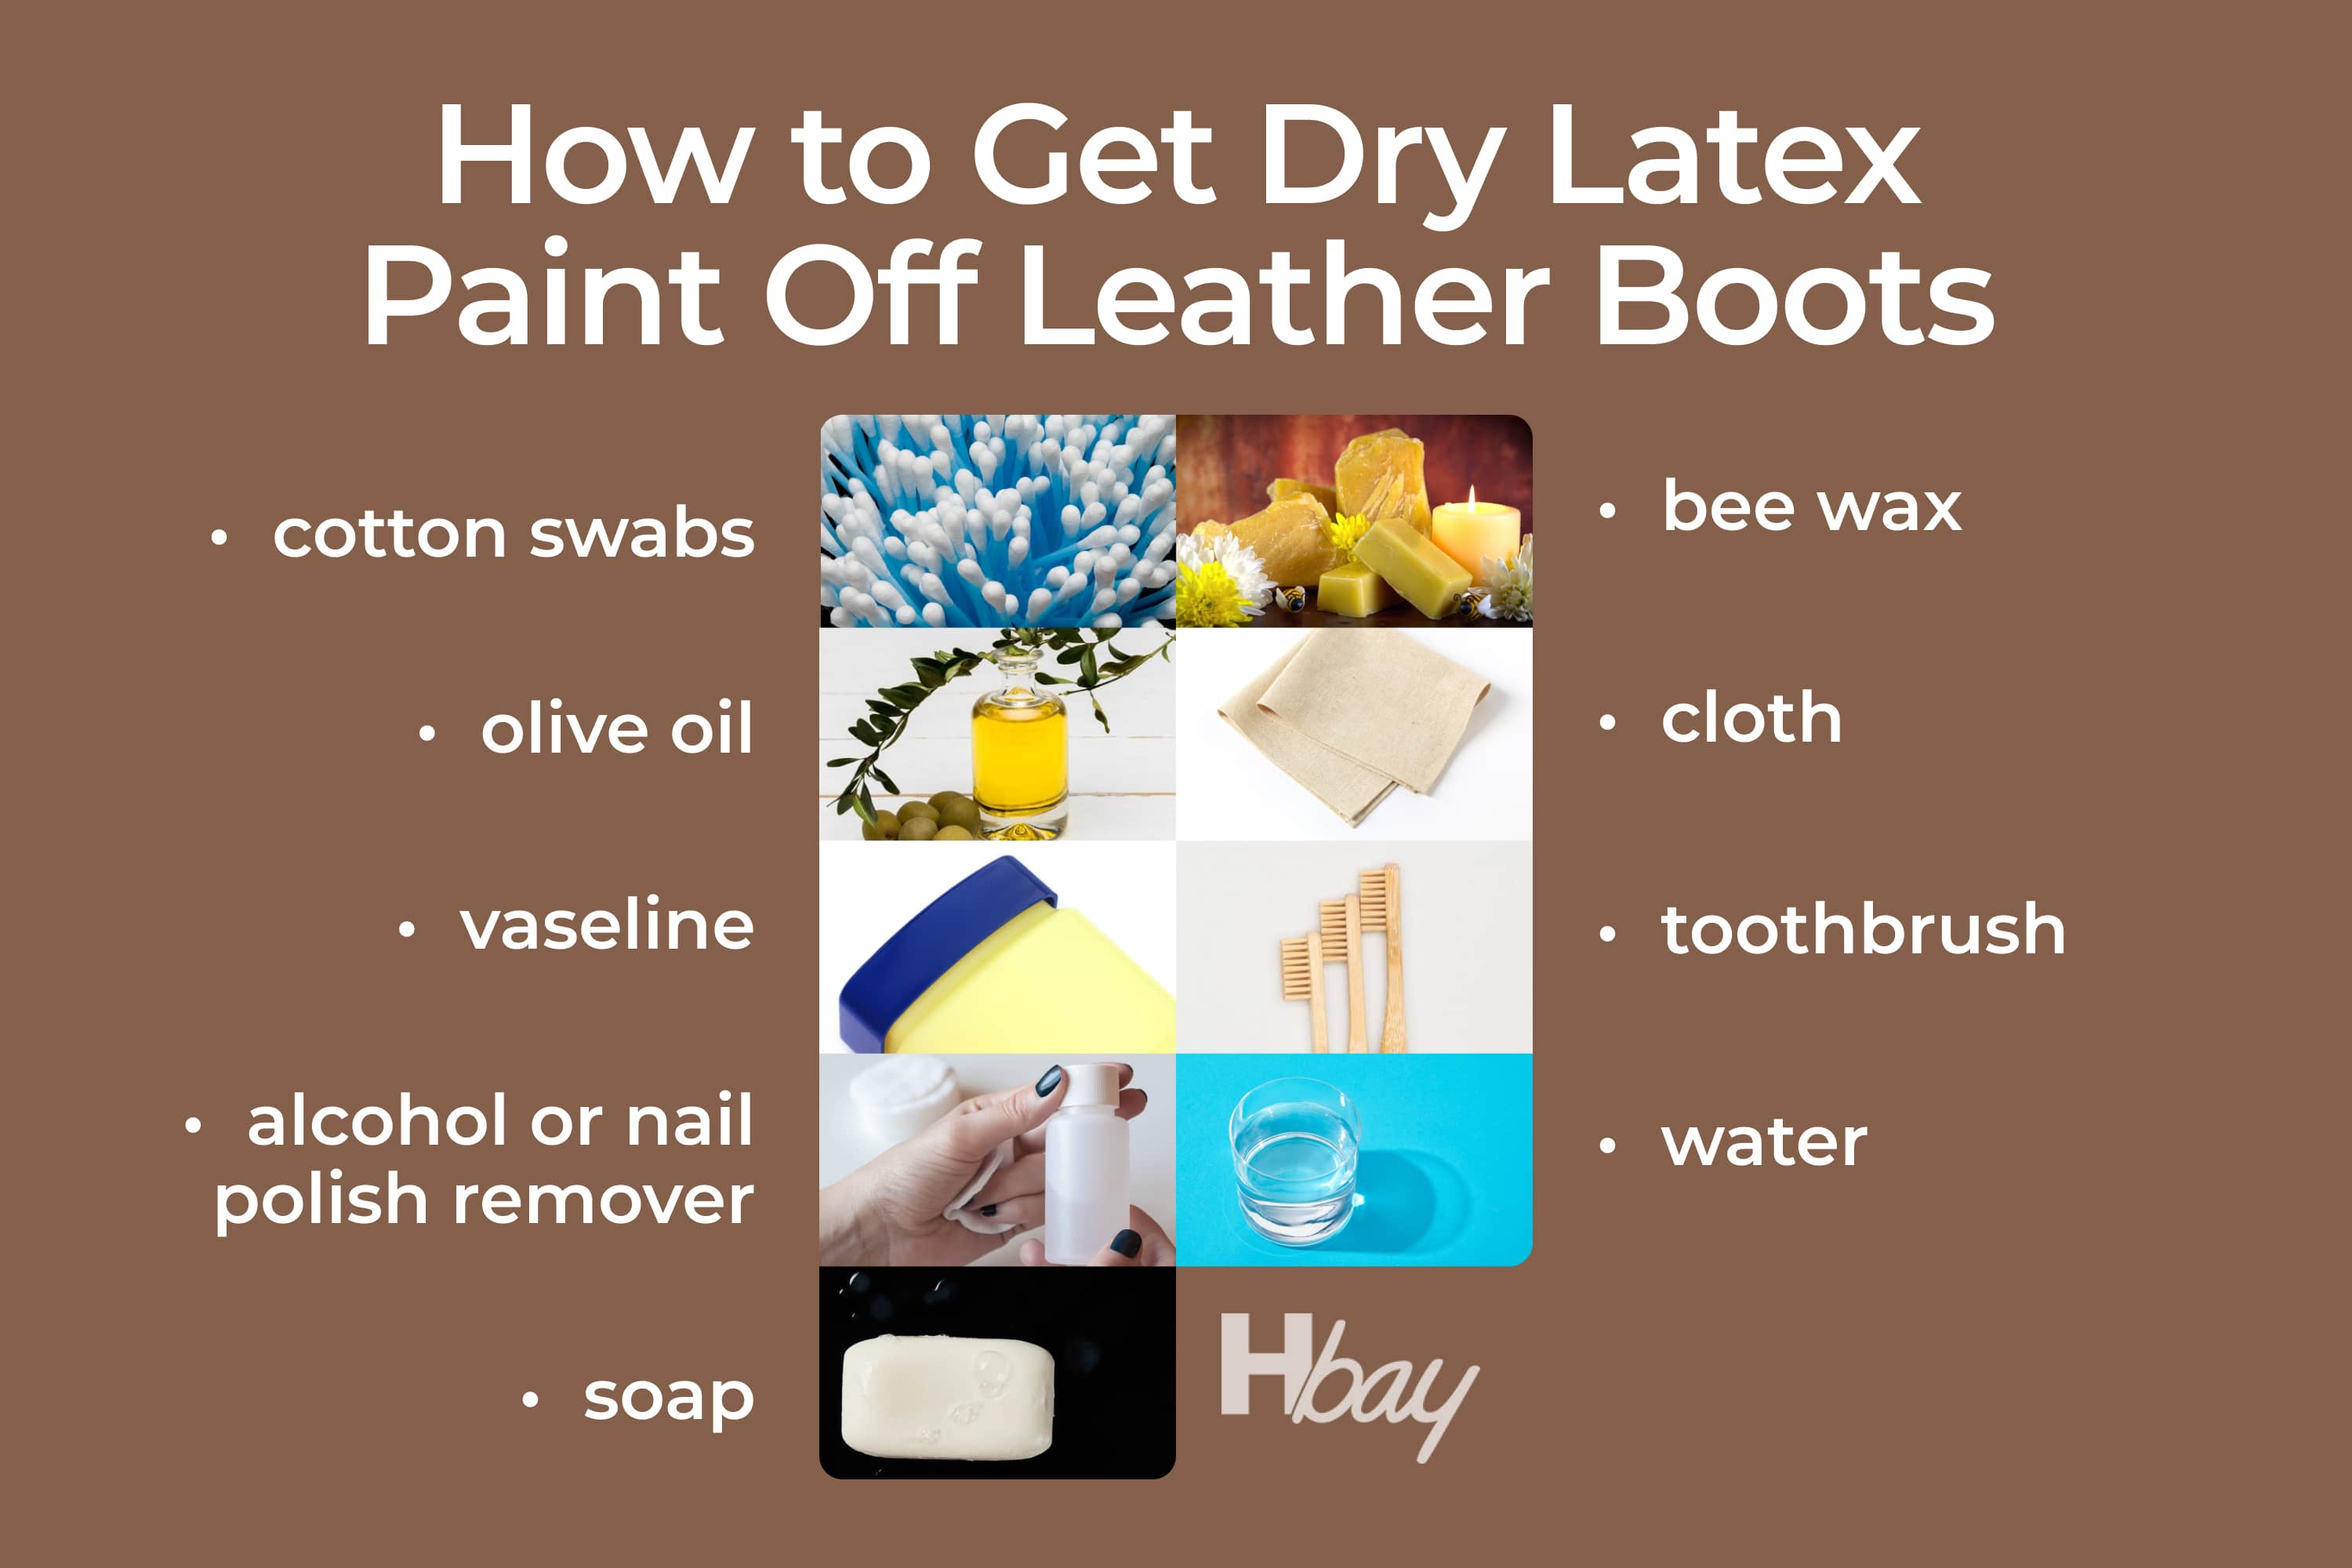 How to Get Dry Latex Paint Off Leather Boots